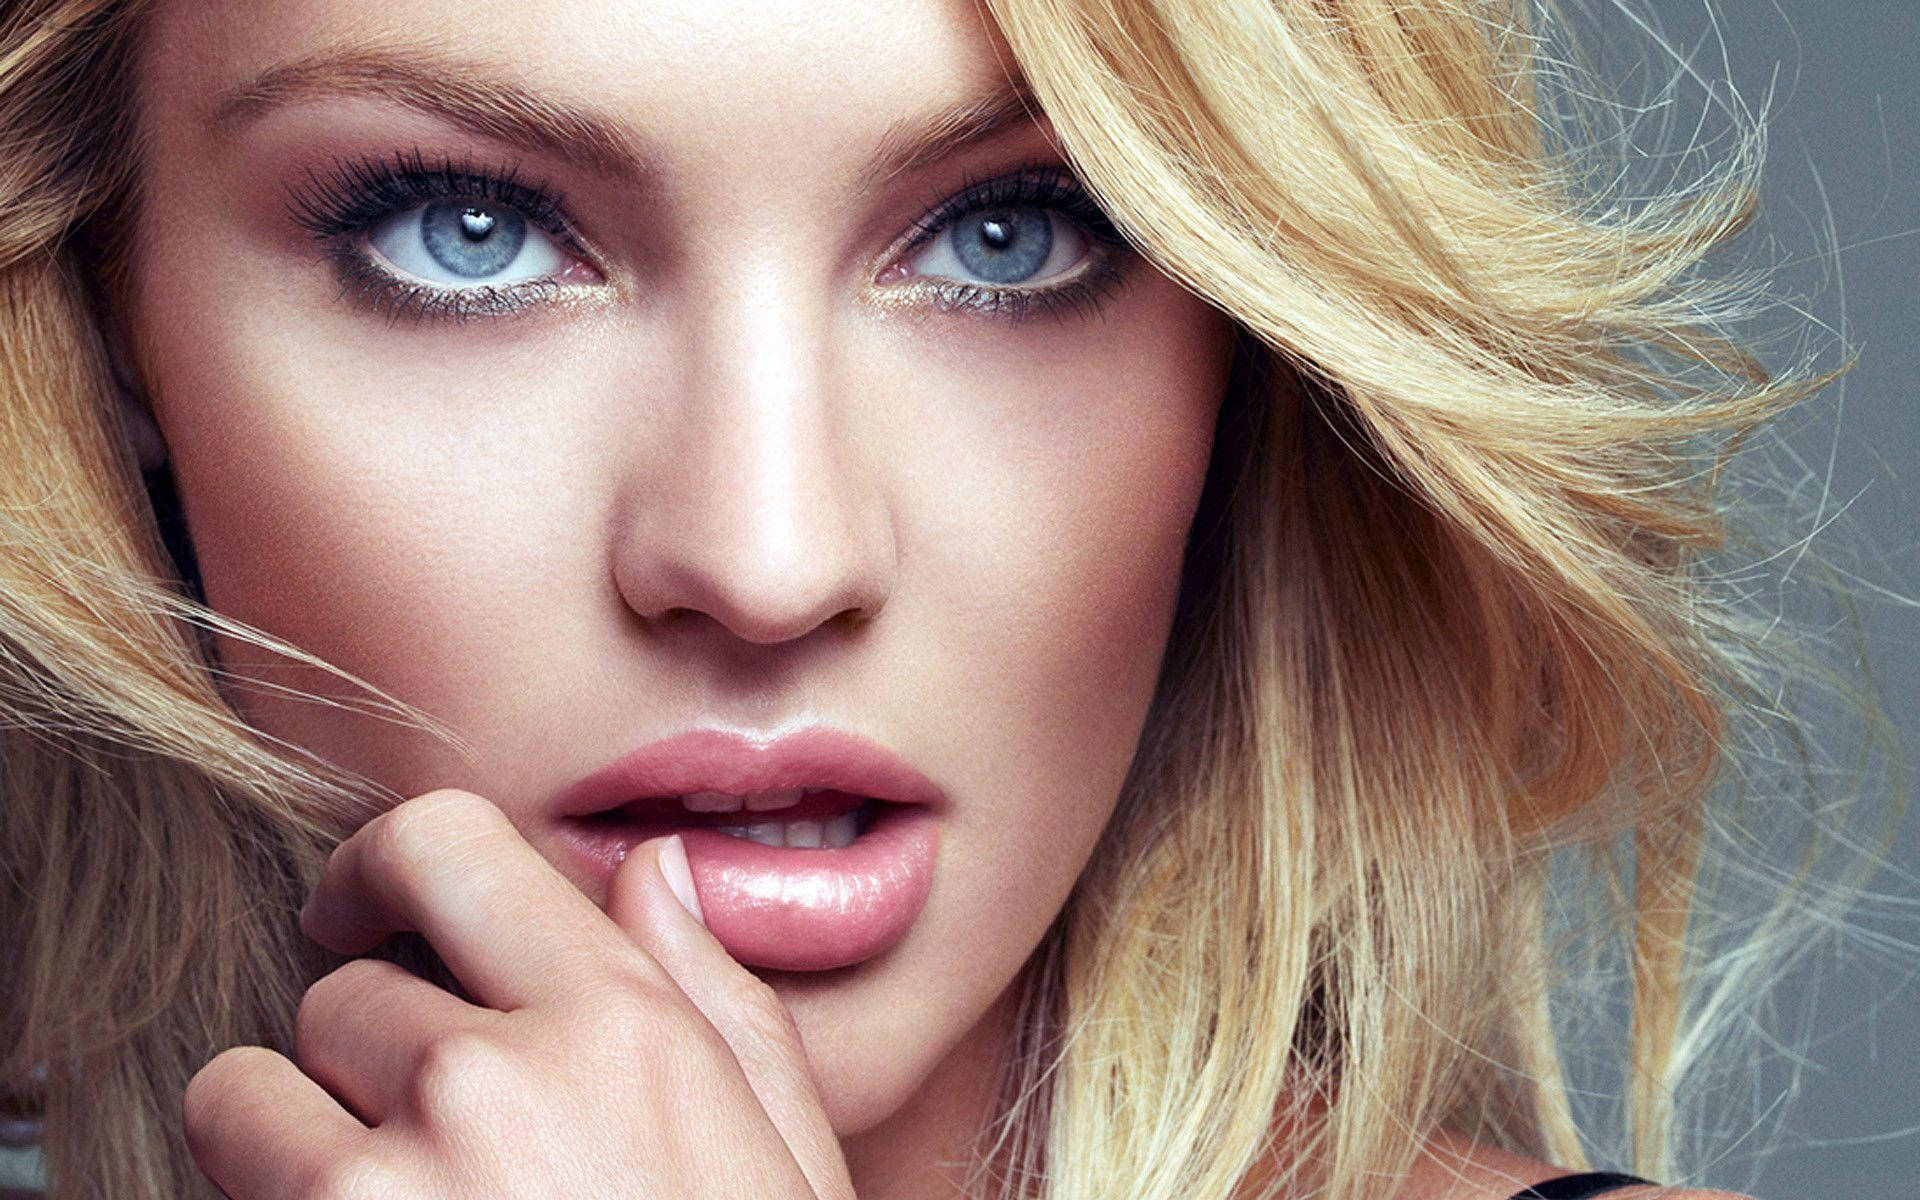 Candice Swanepoel: A Flawless Beauty